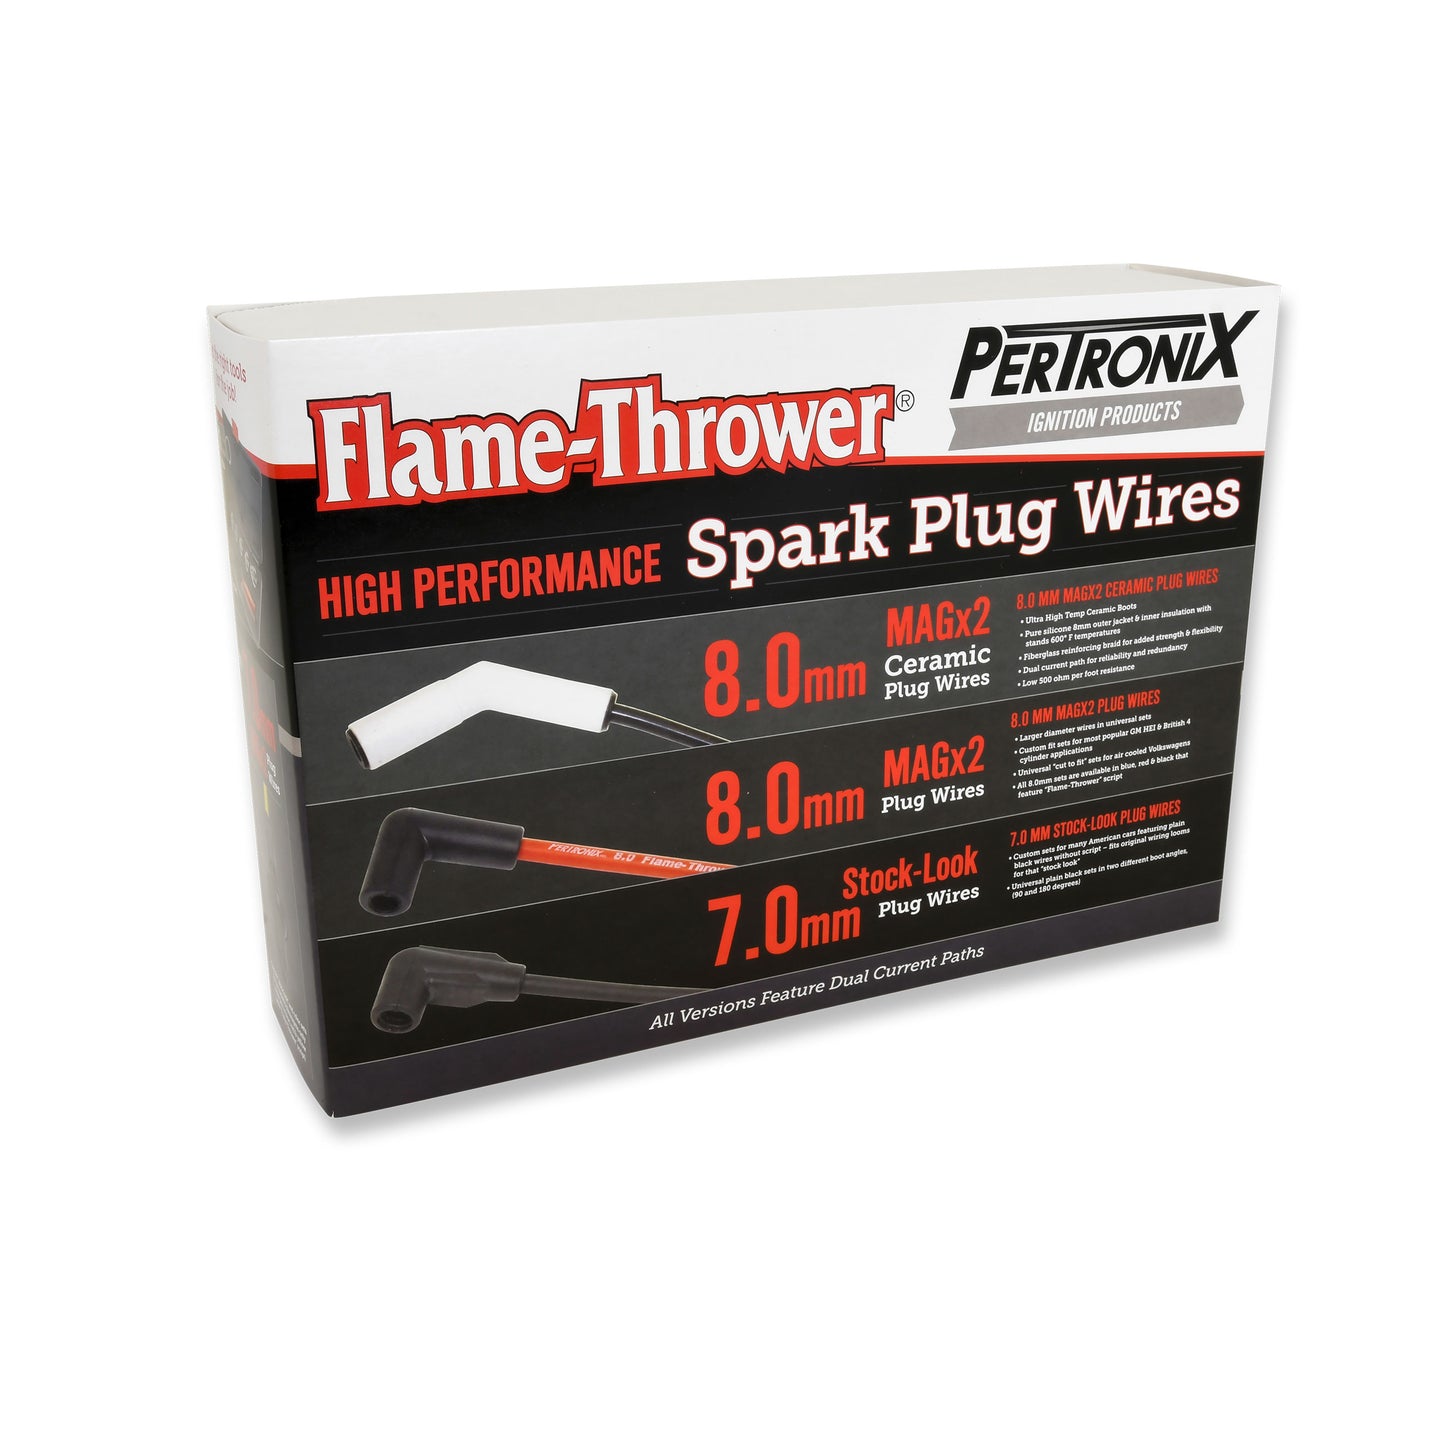 PerTronix 806425 Flame-Thrower Spark Plug Wires 6 cyl 8mm 1996-2005 GM Full size Truck 4.3L Red